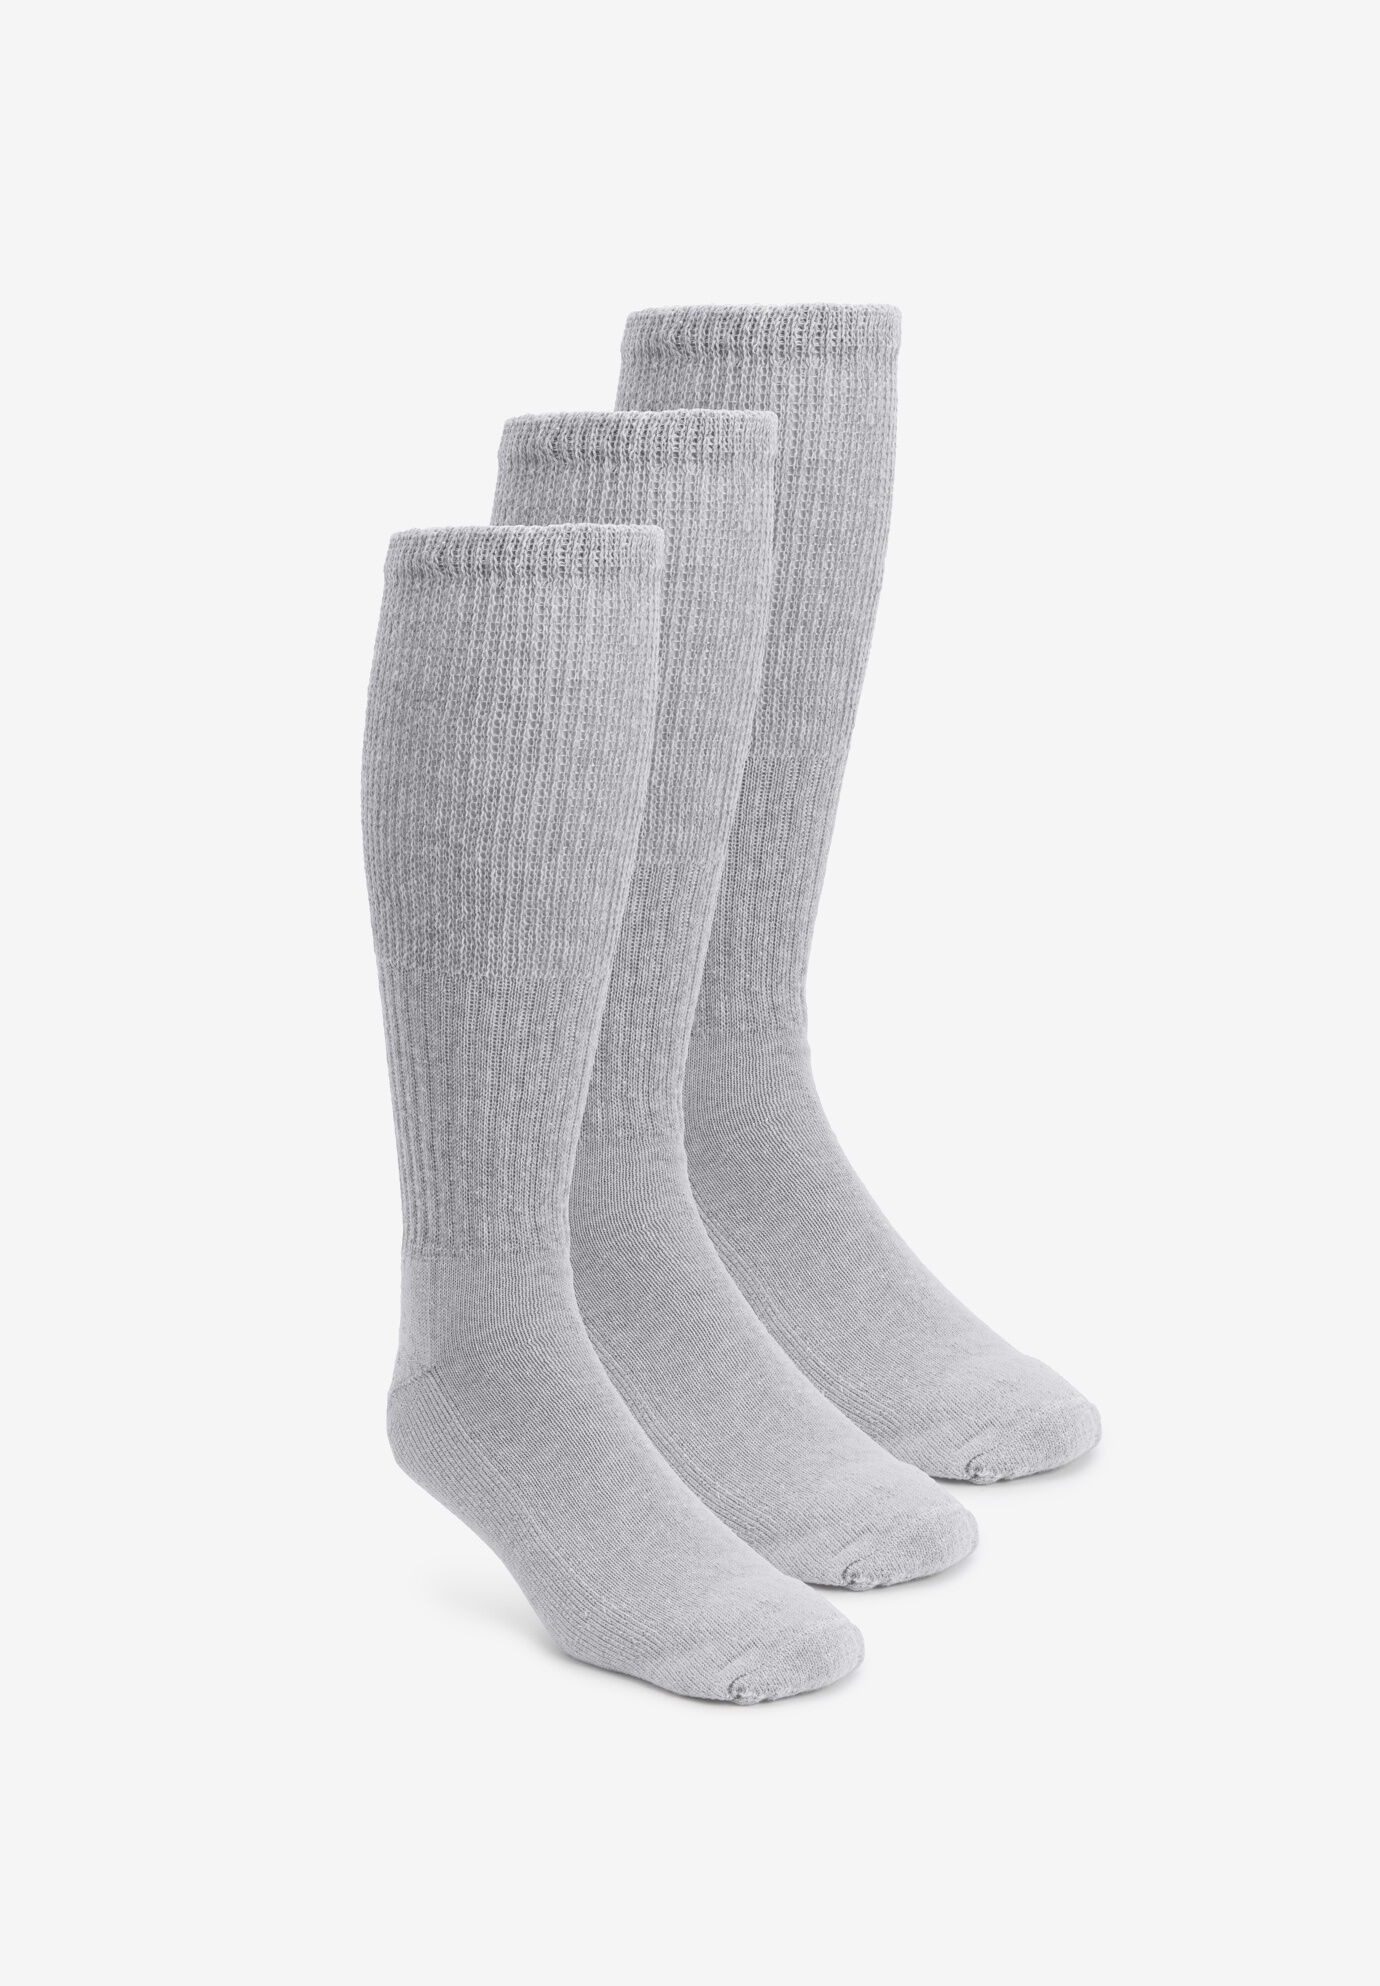 Non-Binding and Seamless Toe for Sensitive Tired and Achy feet 3 Pairs of King Size Extra Wide Socks size 12-18 White 